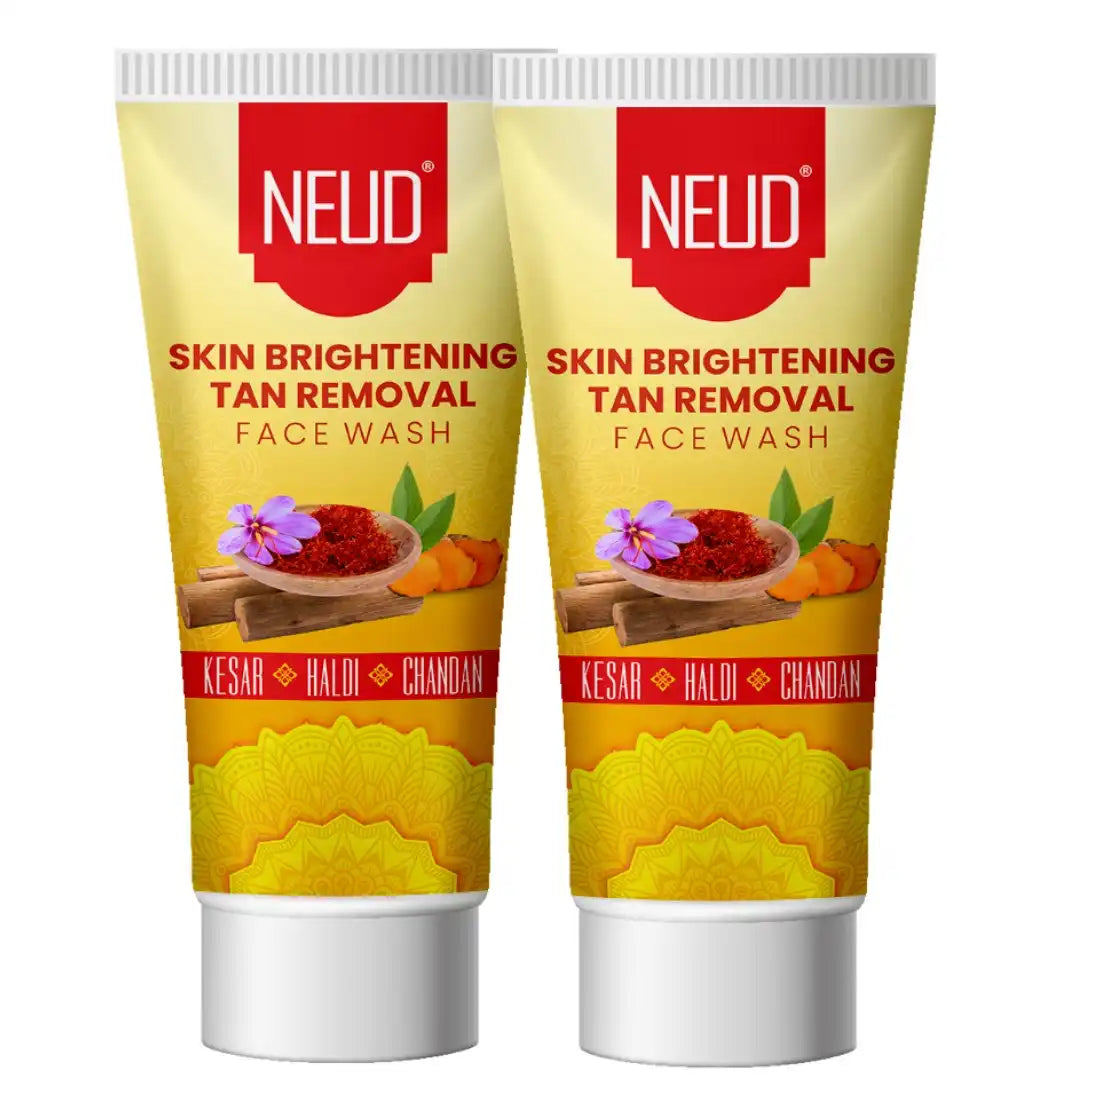 NEUD Skin Brightening Tan Removal Face Wash for Men and Women - 70ml